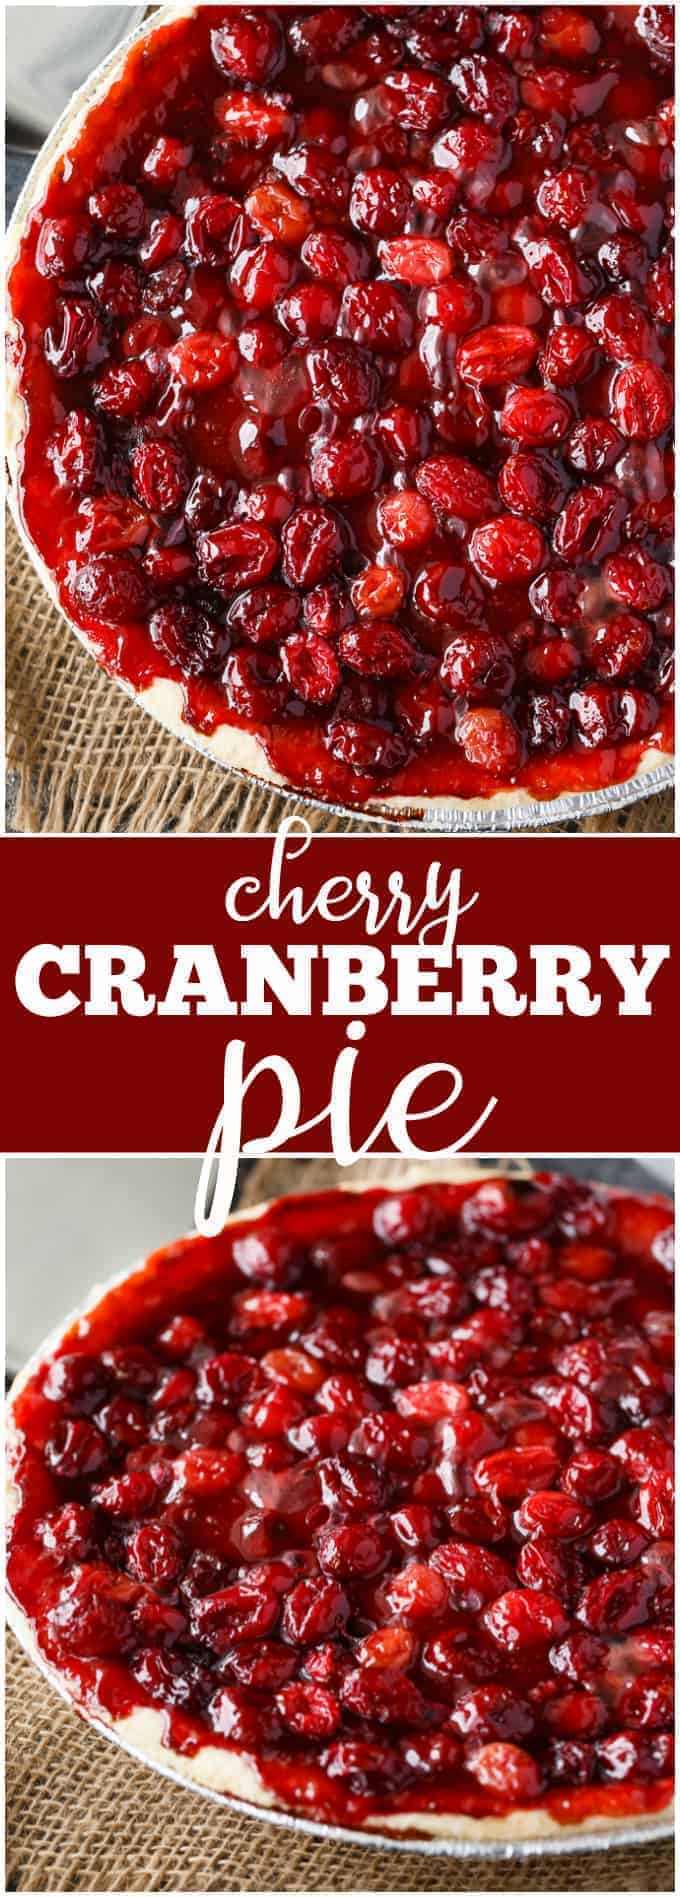 Cherry Cranberry Pie - A beautiful holiday dessert for any spread! Just five ingredients in this decadent and tart treat.